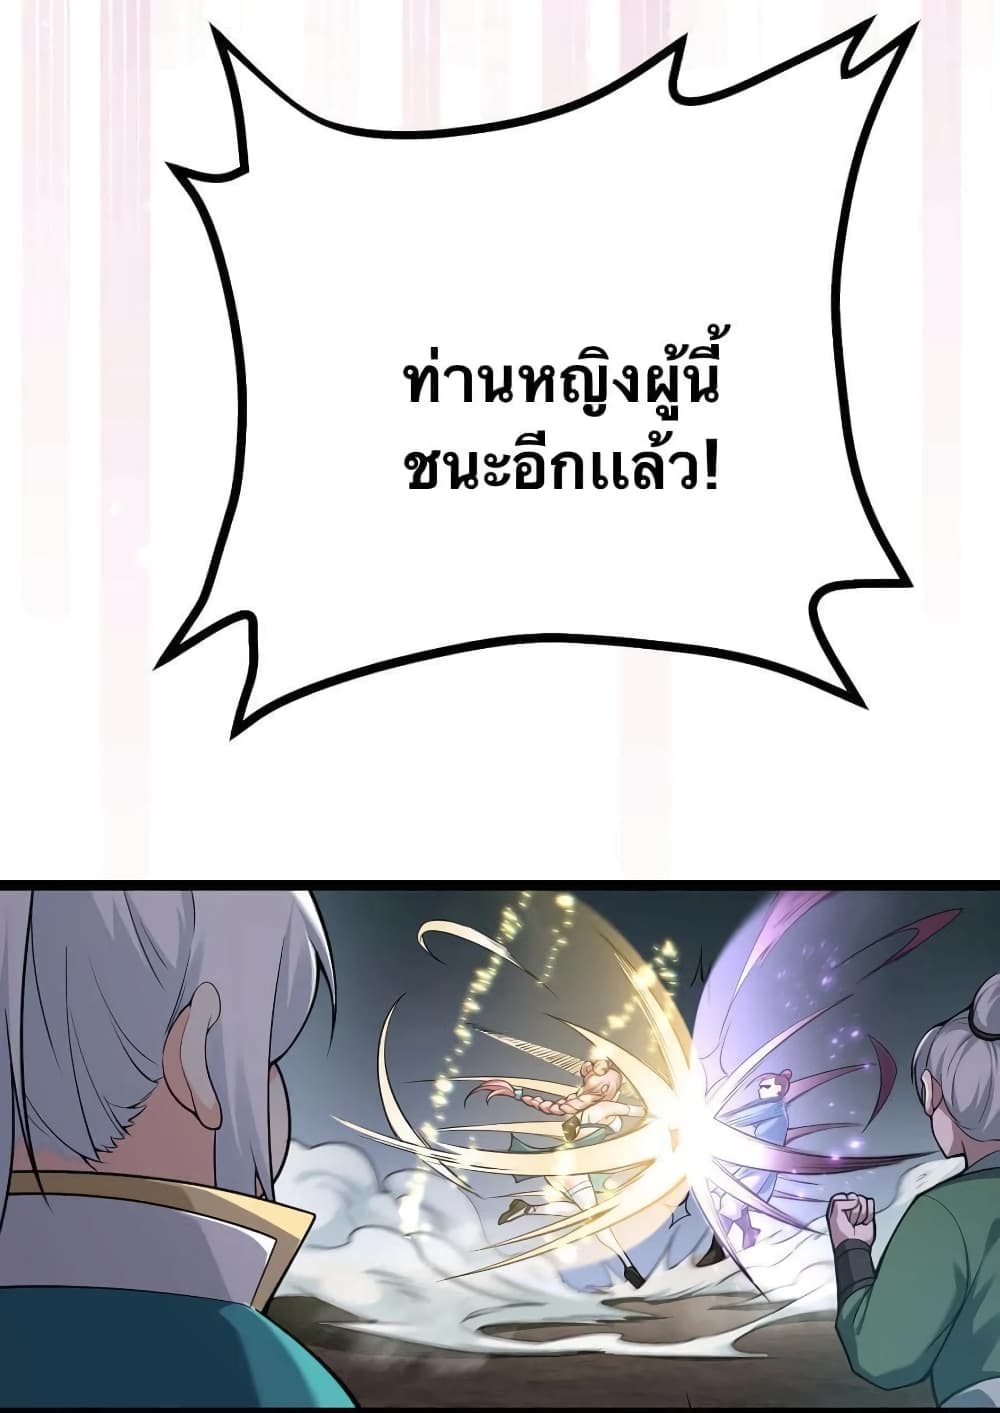 Godsian Masian from Another World 71 แปลไทย